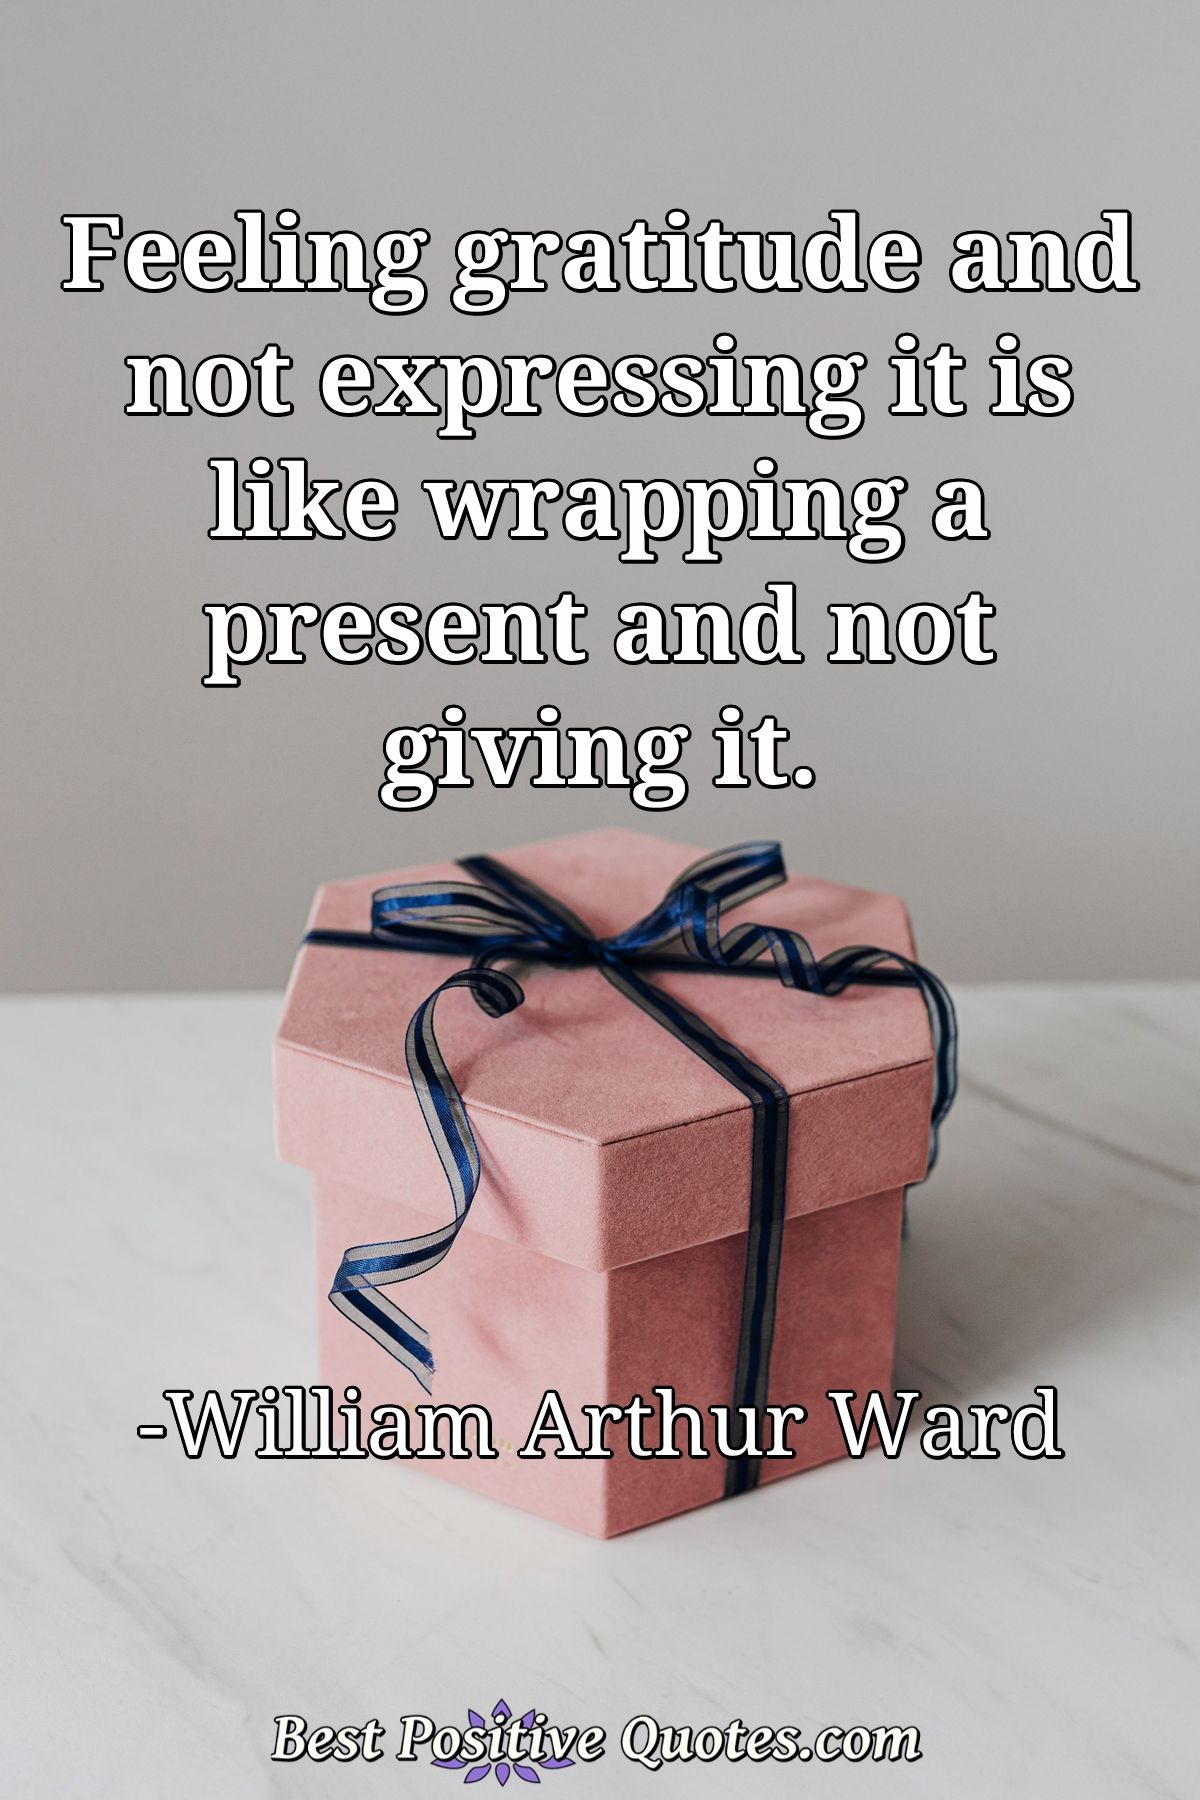 Feeling gratitude and not expressing it is like wrapping a present and not giving it. - William Arthur Ward